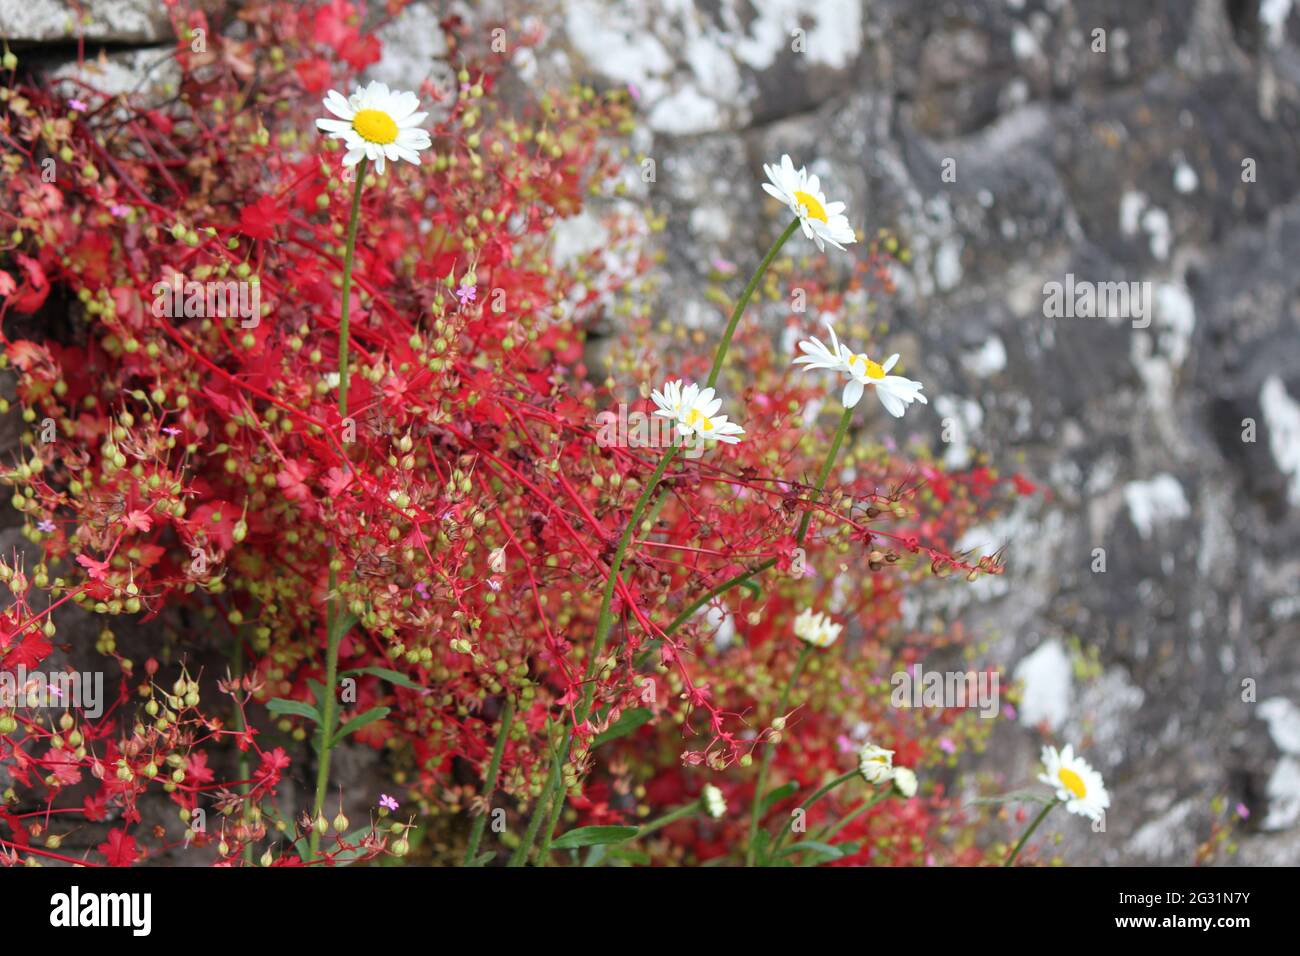 Wild Daisies and red plants growing against a decorative stone wall. Country living and the outdoors in Scotland. Vibrant red in nature. Summer, UK. Stock Photo